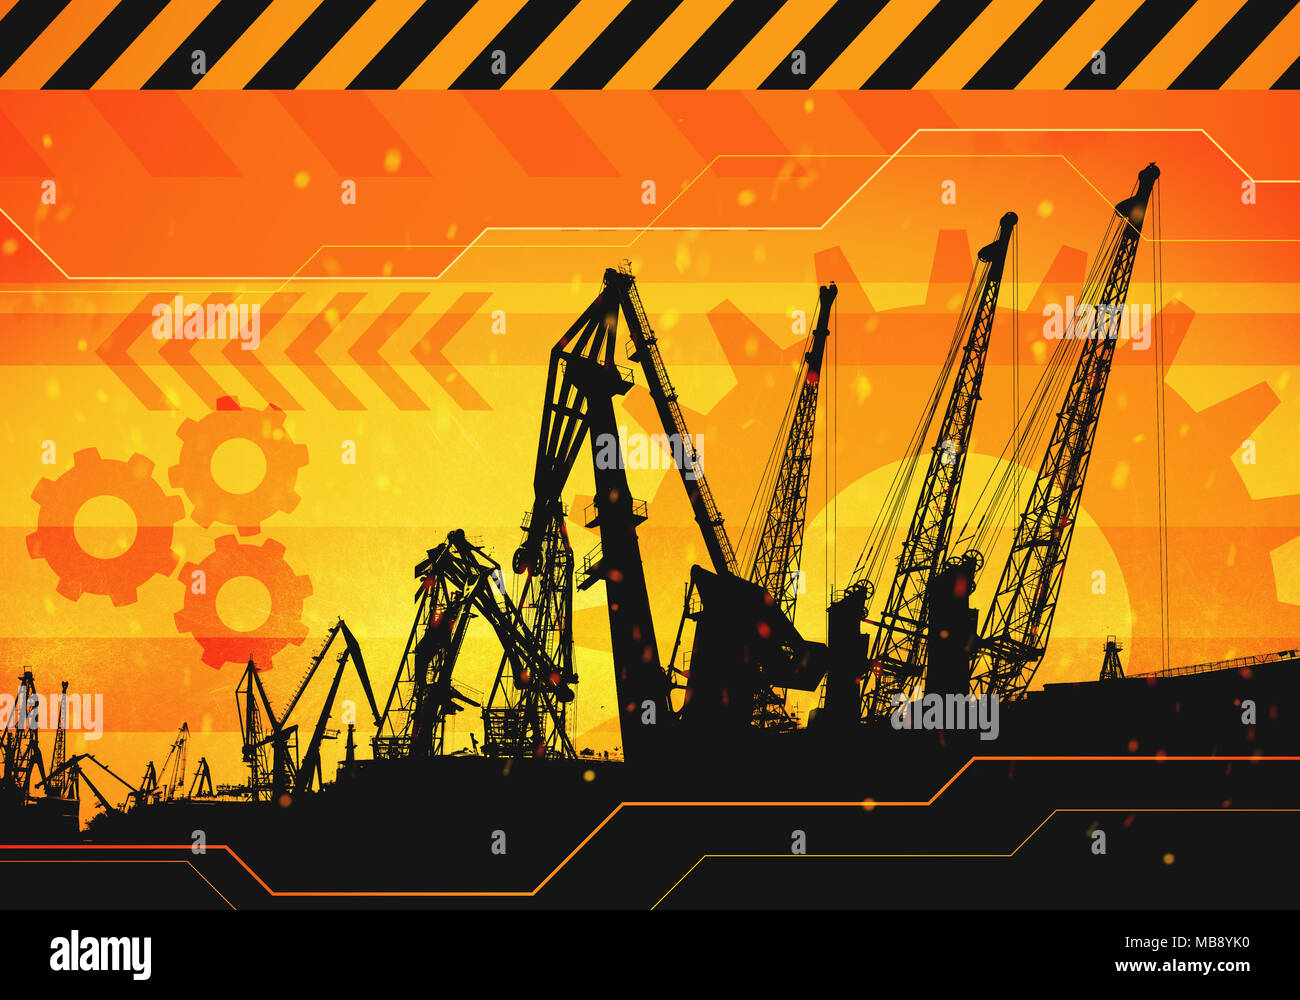 2d industrial illustration of under construction background with construction crane. Caution warning tape. Stock Photo